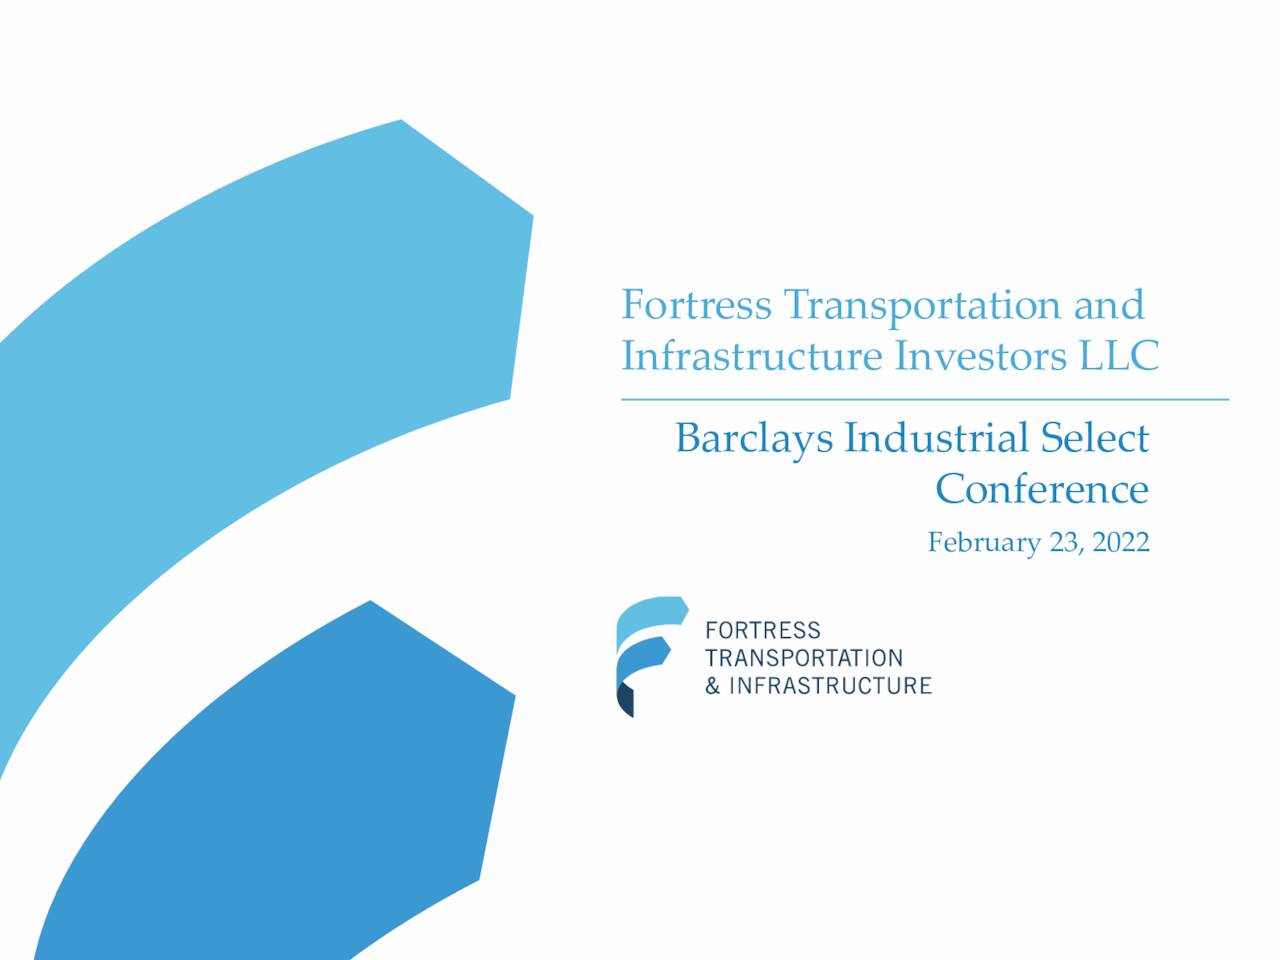 Fortress Transportation and Infrastructure Investors LLC (FTAI